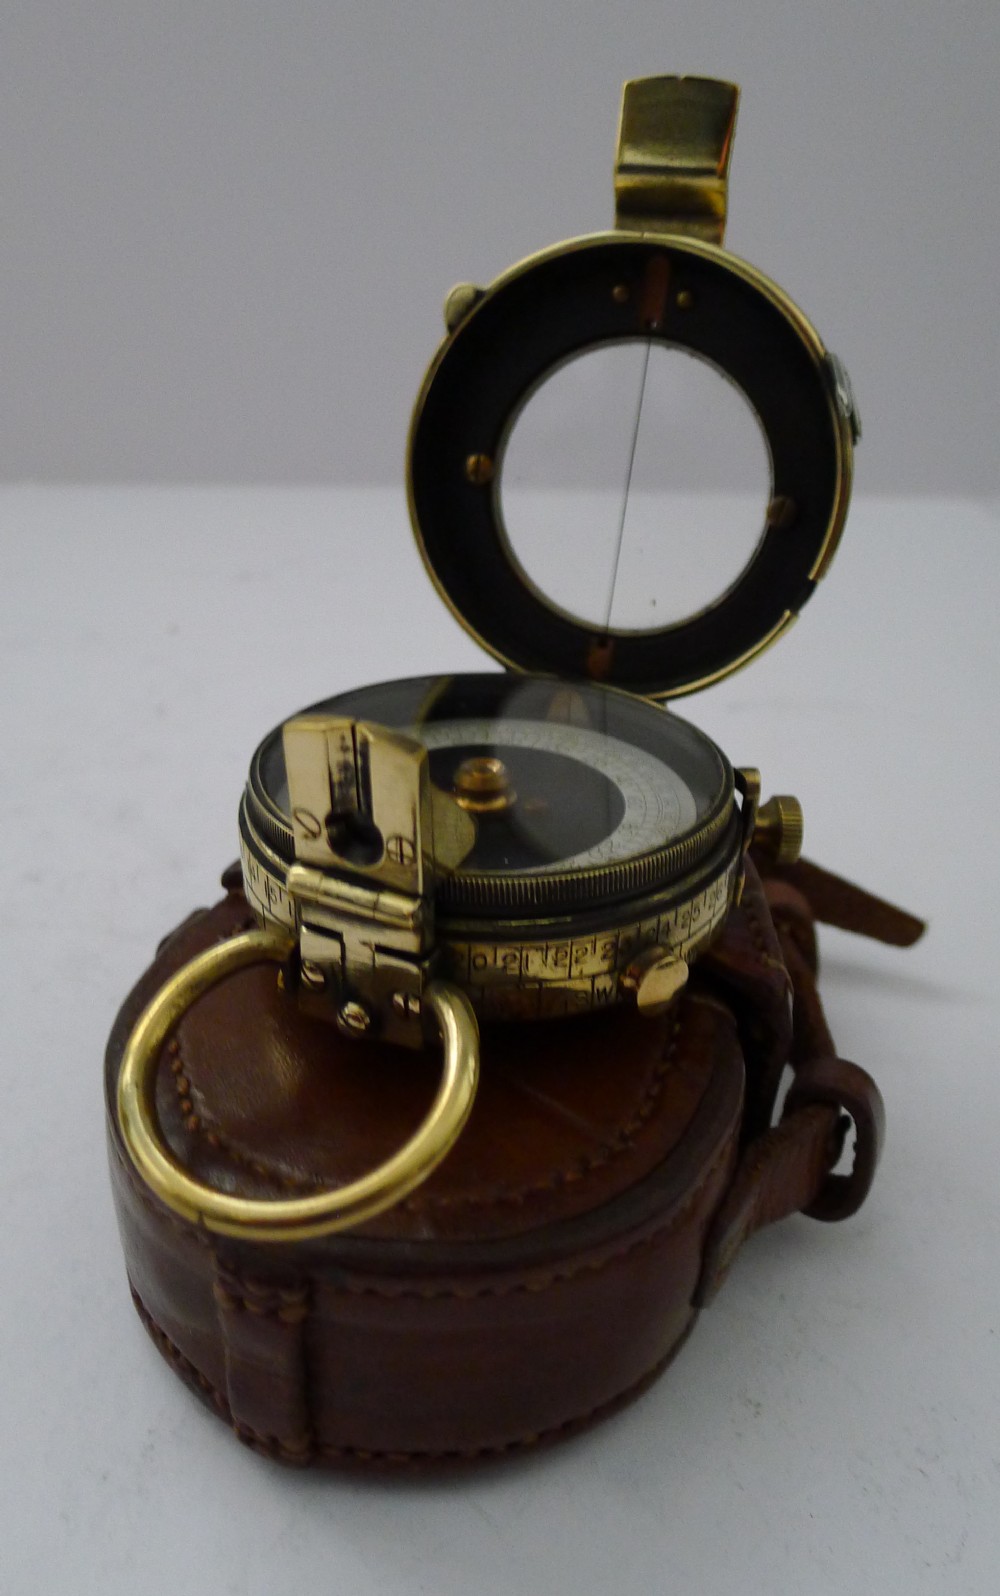 ww1 1918 british army officer's compass verner's patent mk vii by french ltd